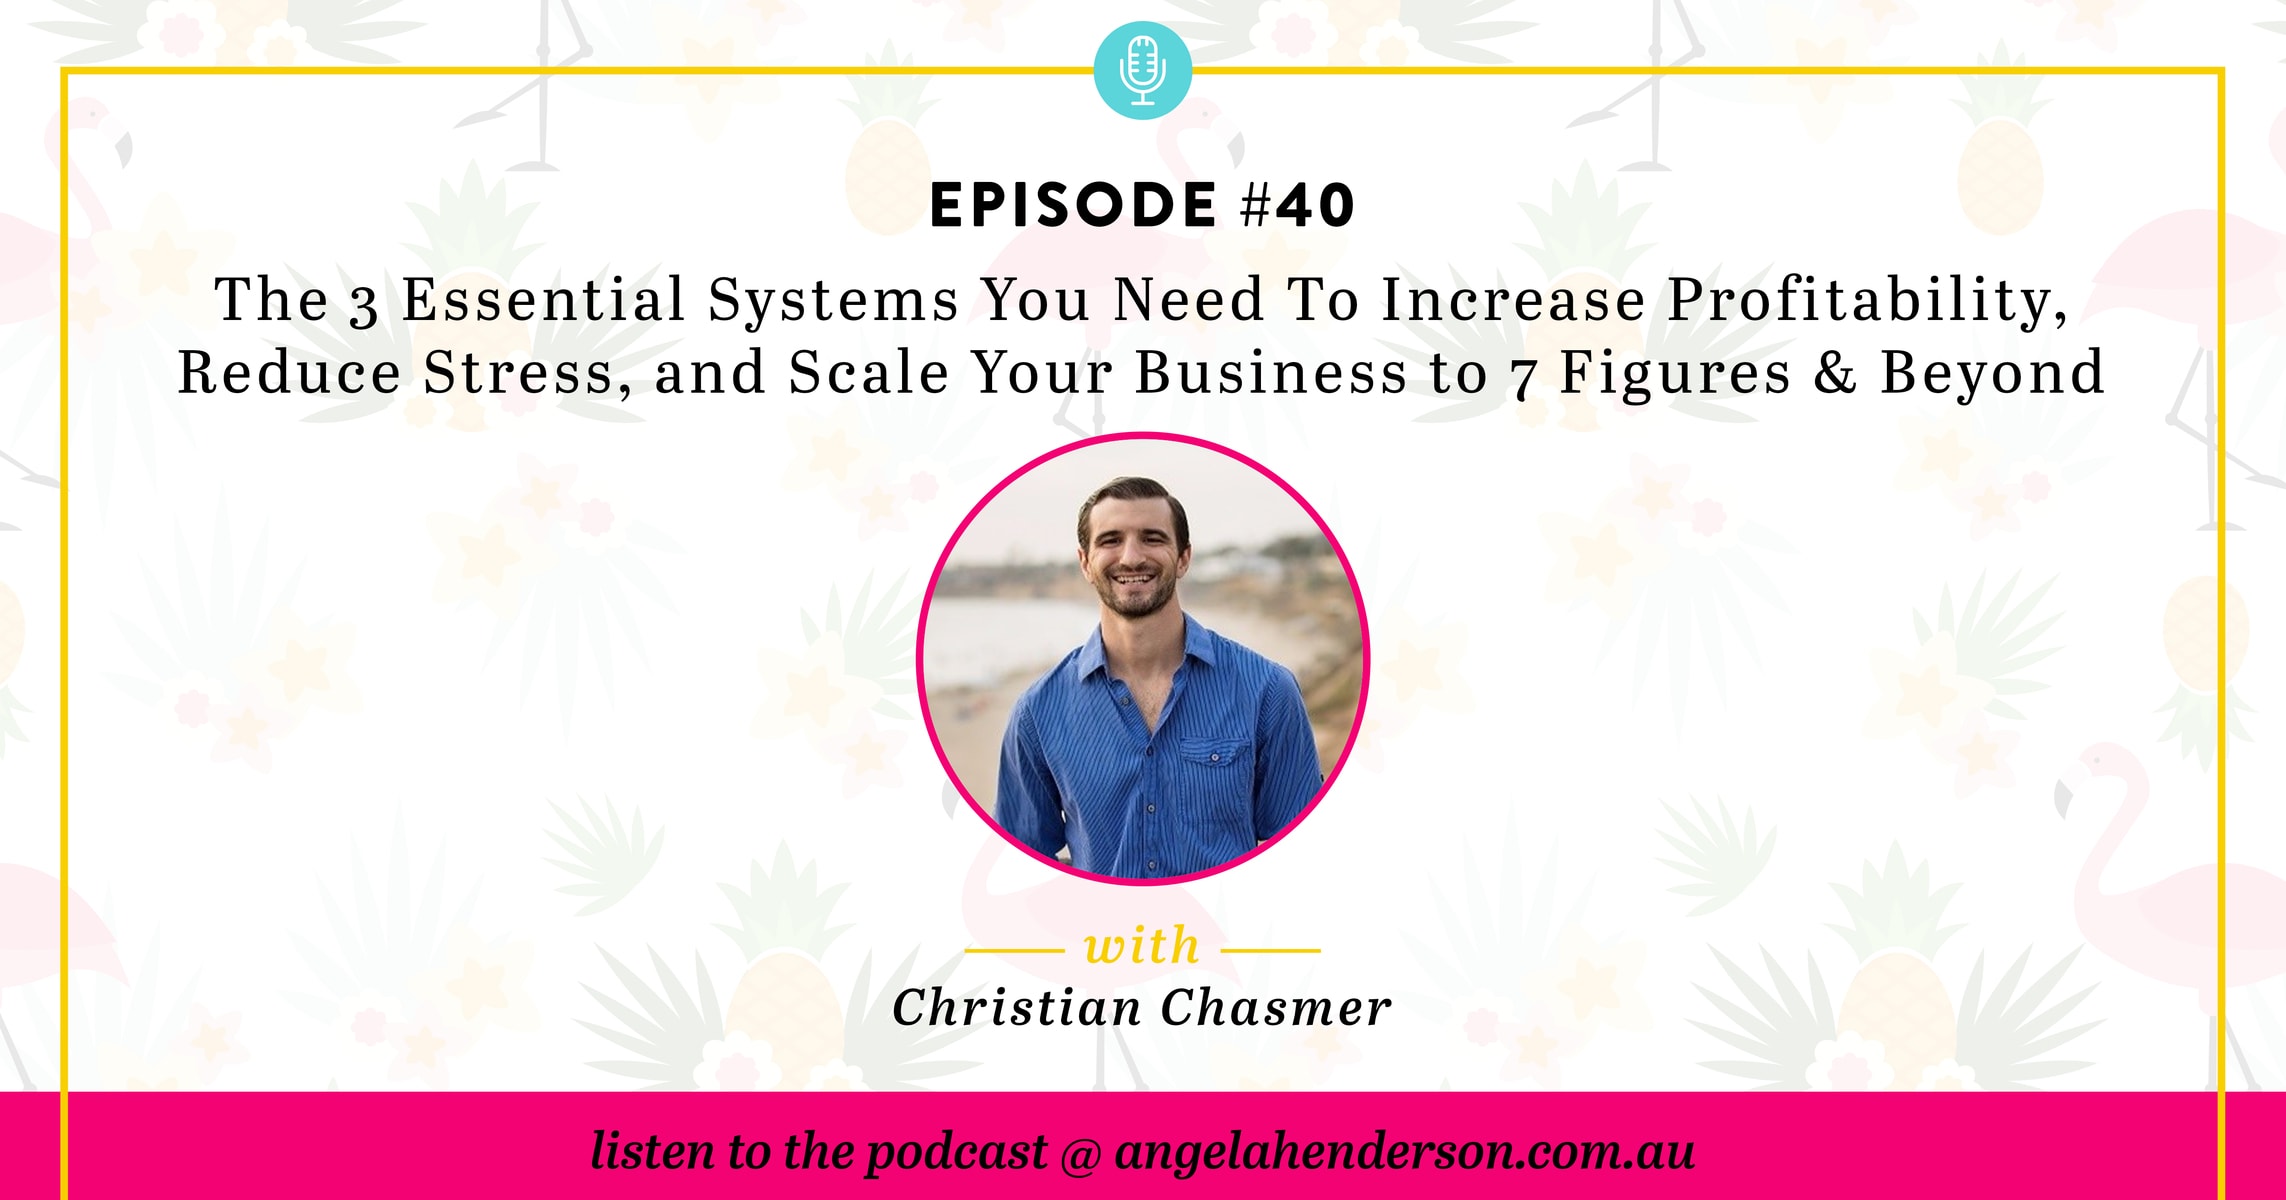 The 3 essential systems you need to increase profitability, reduce stress, and scale your business to 7 figures and beyond